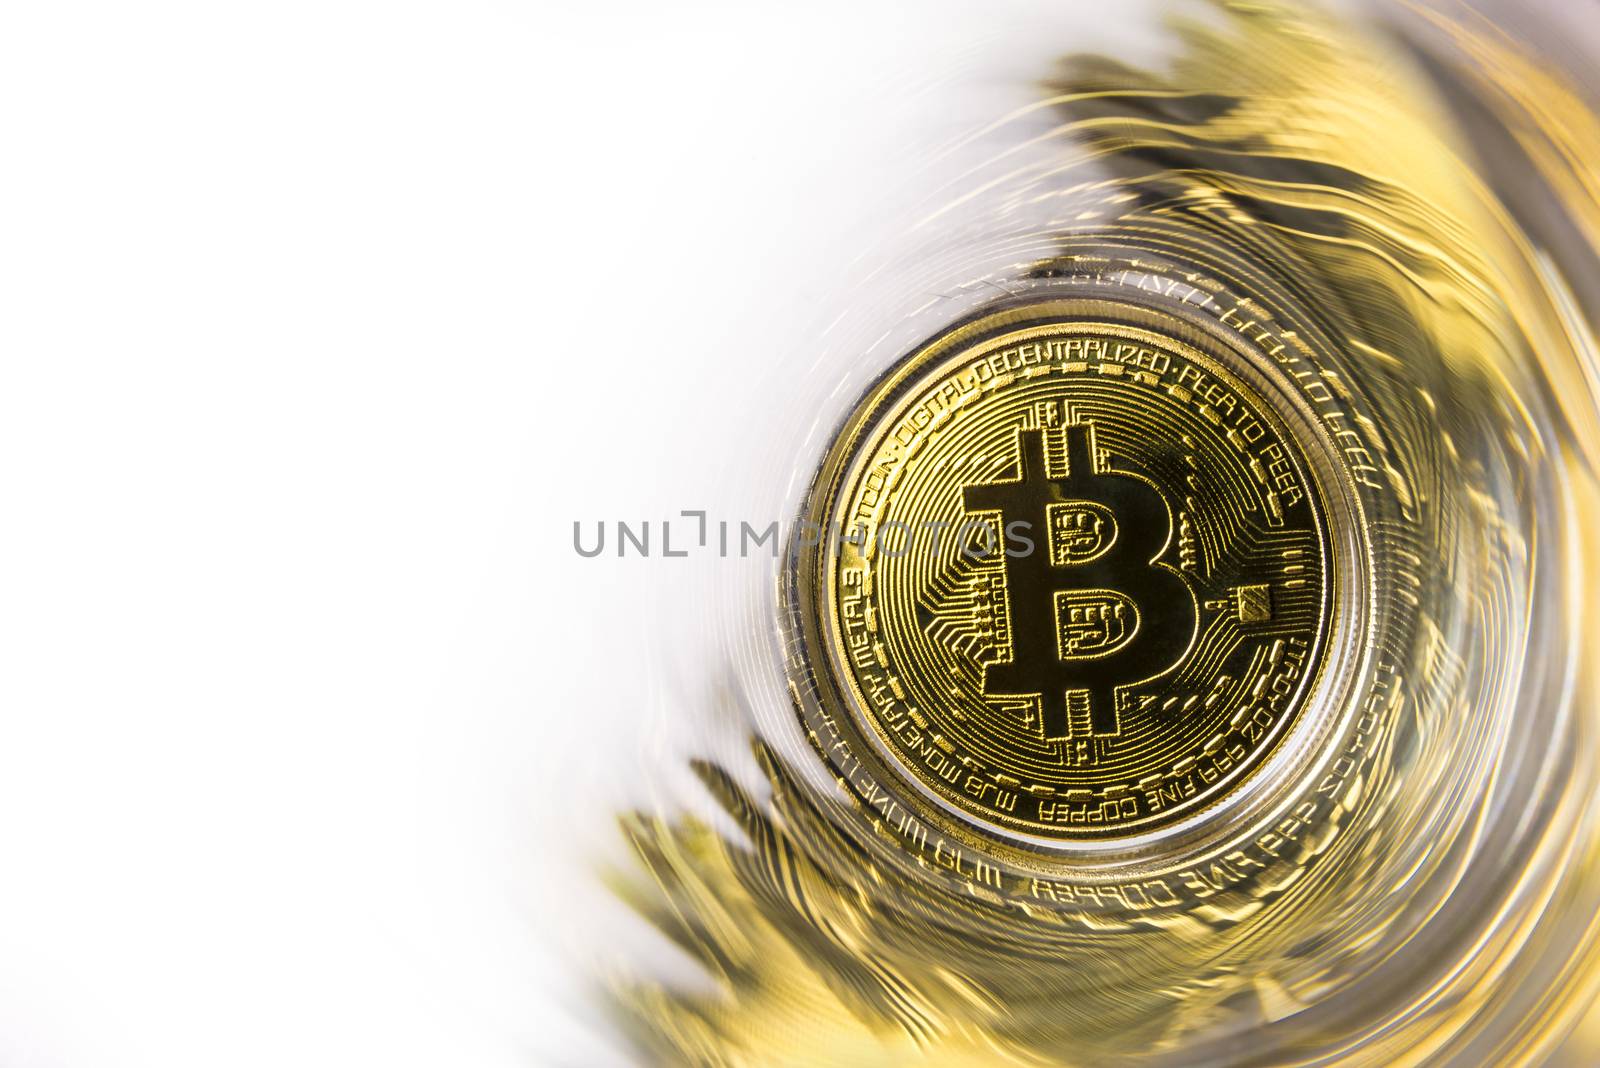 Golden Bitcoin coin on white background. Cryptocurrency